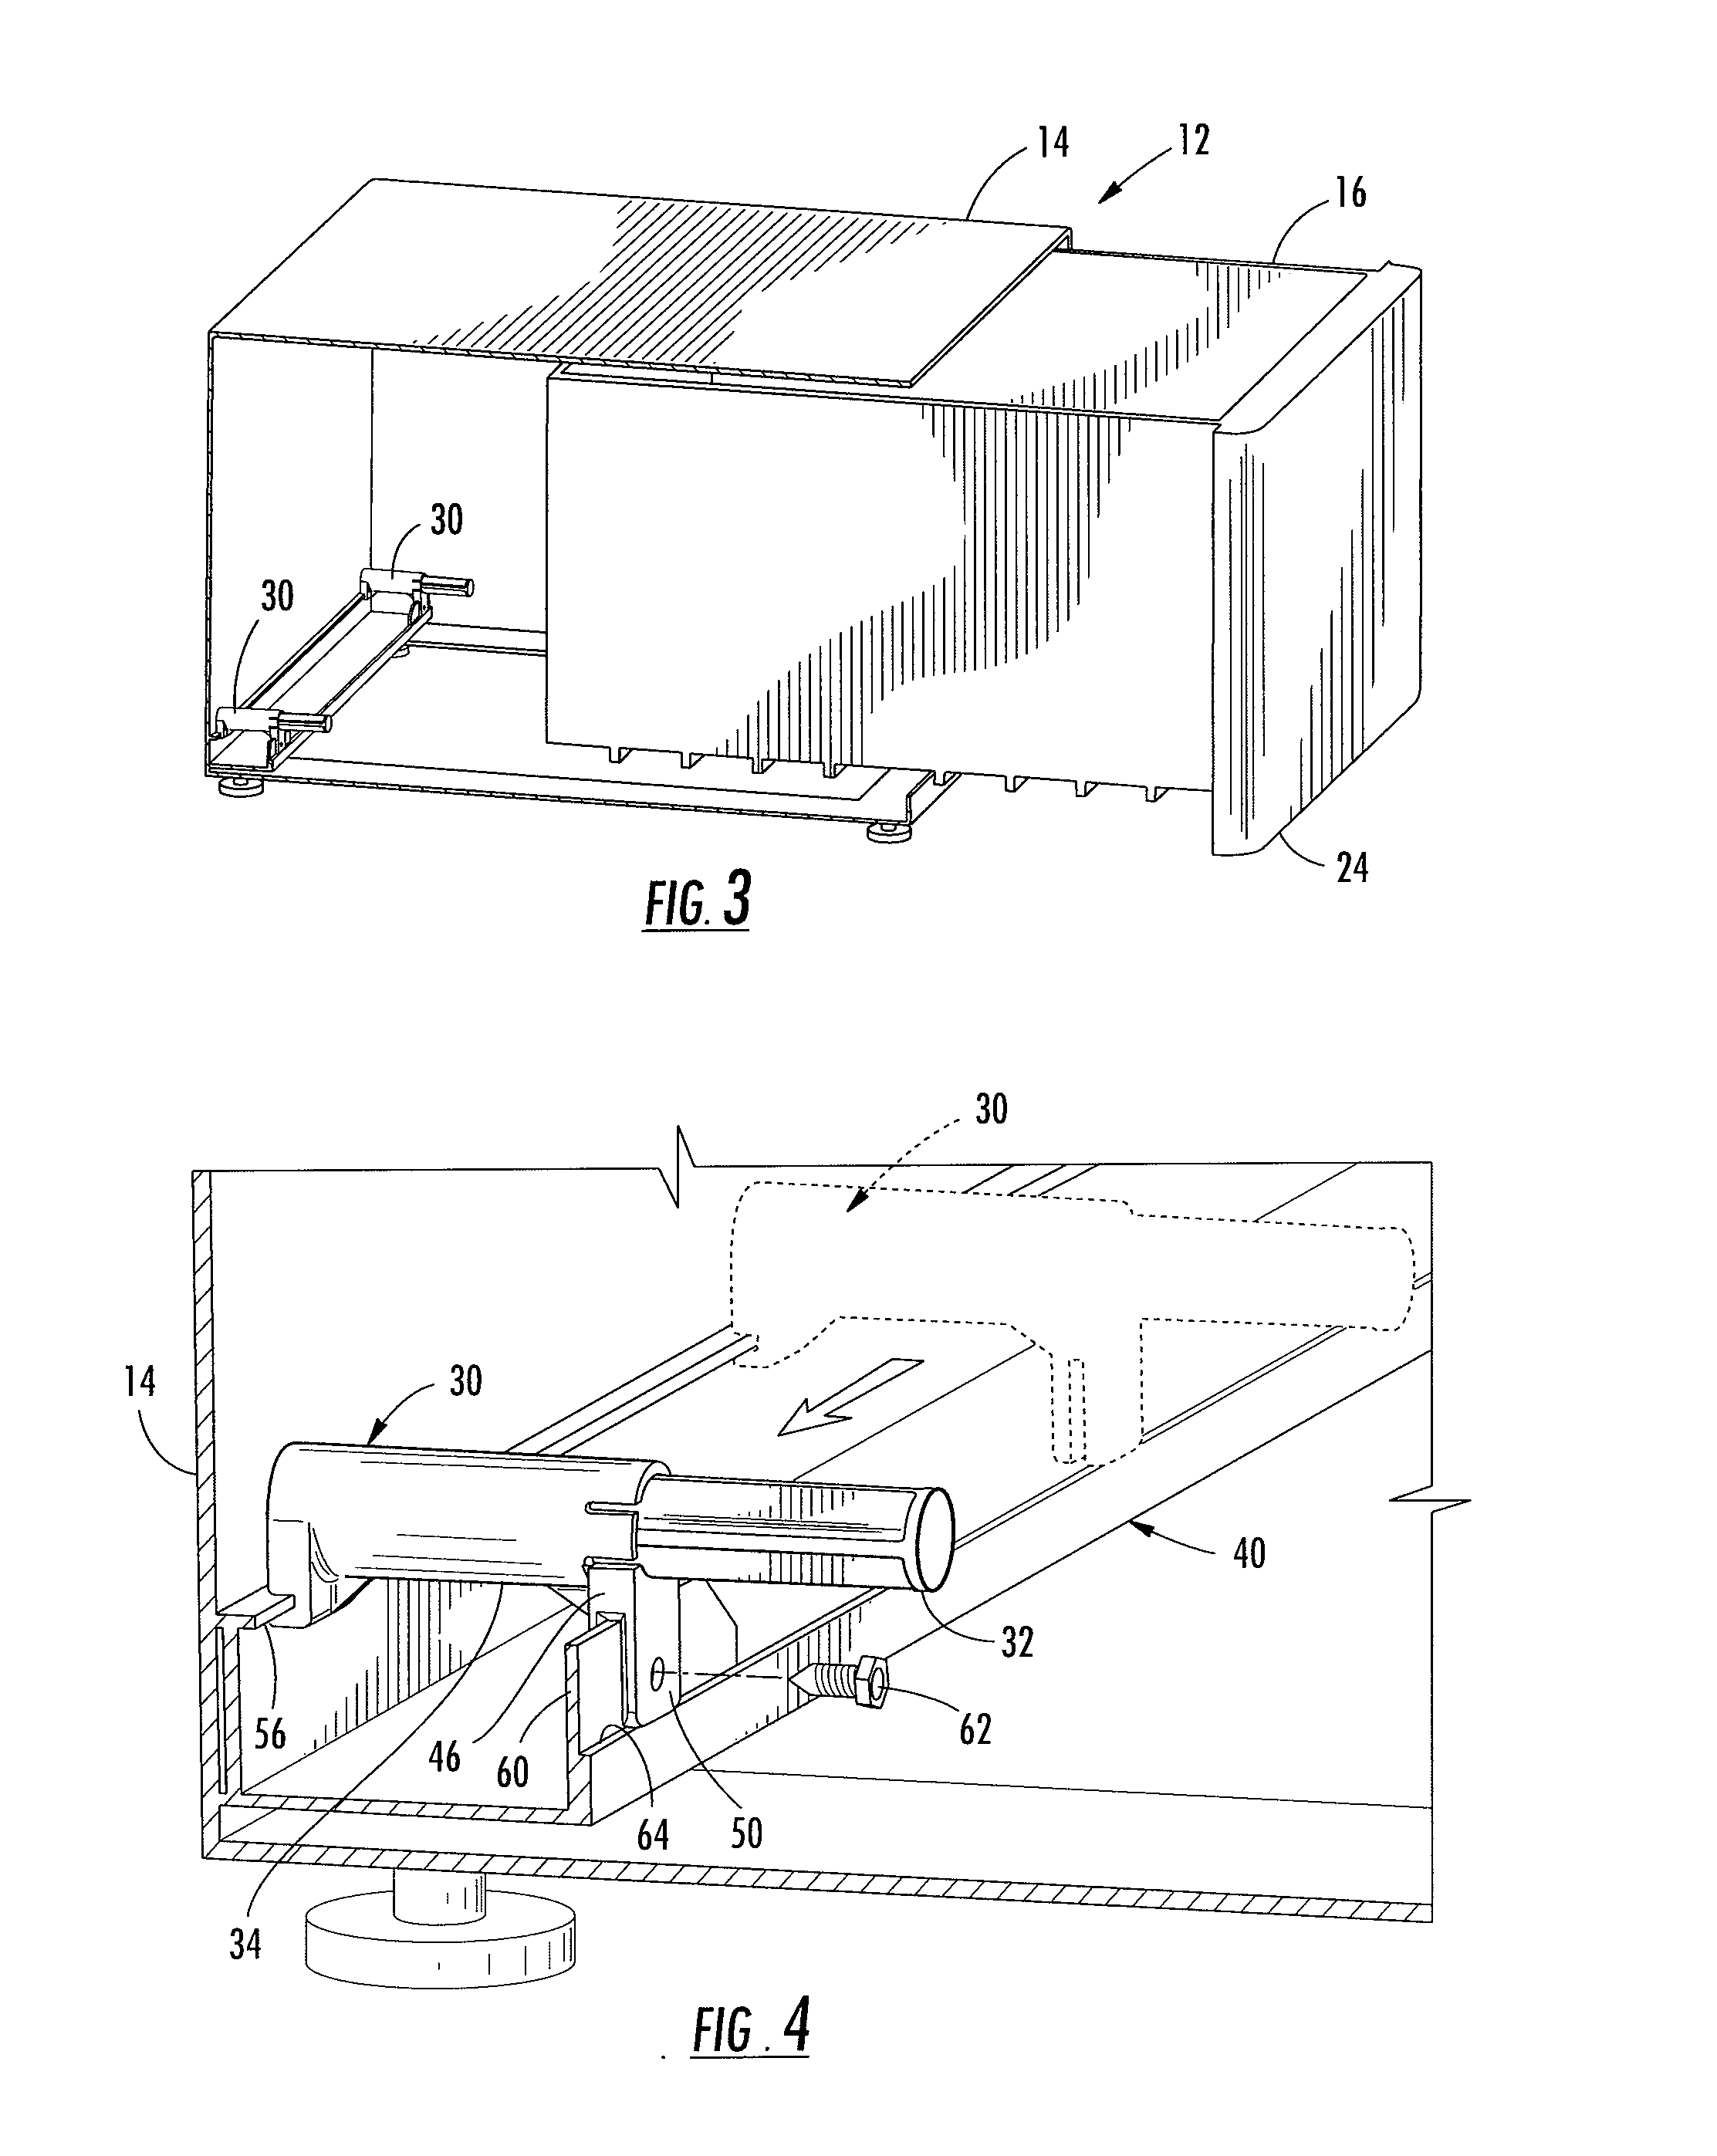 Drawer Actuator and Latch System